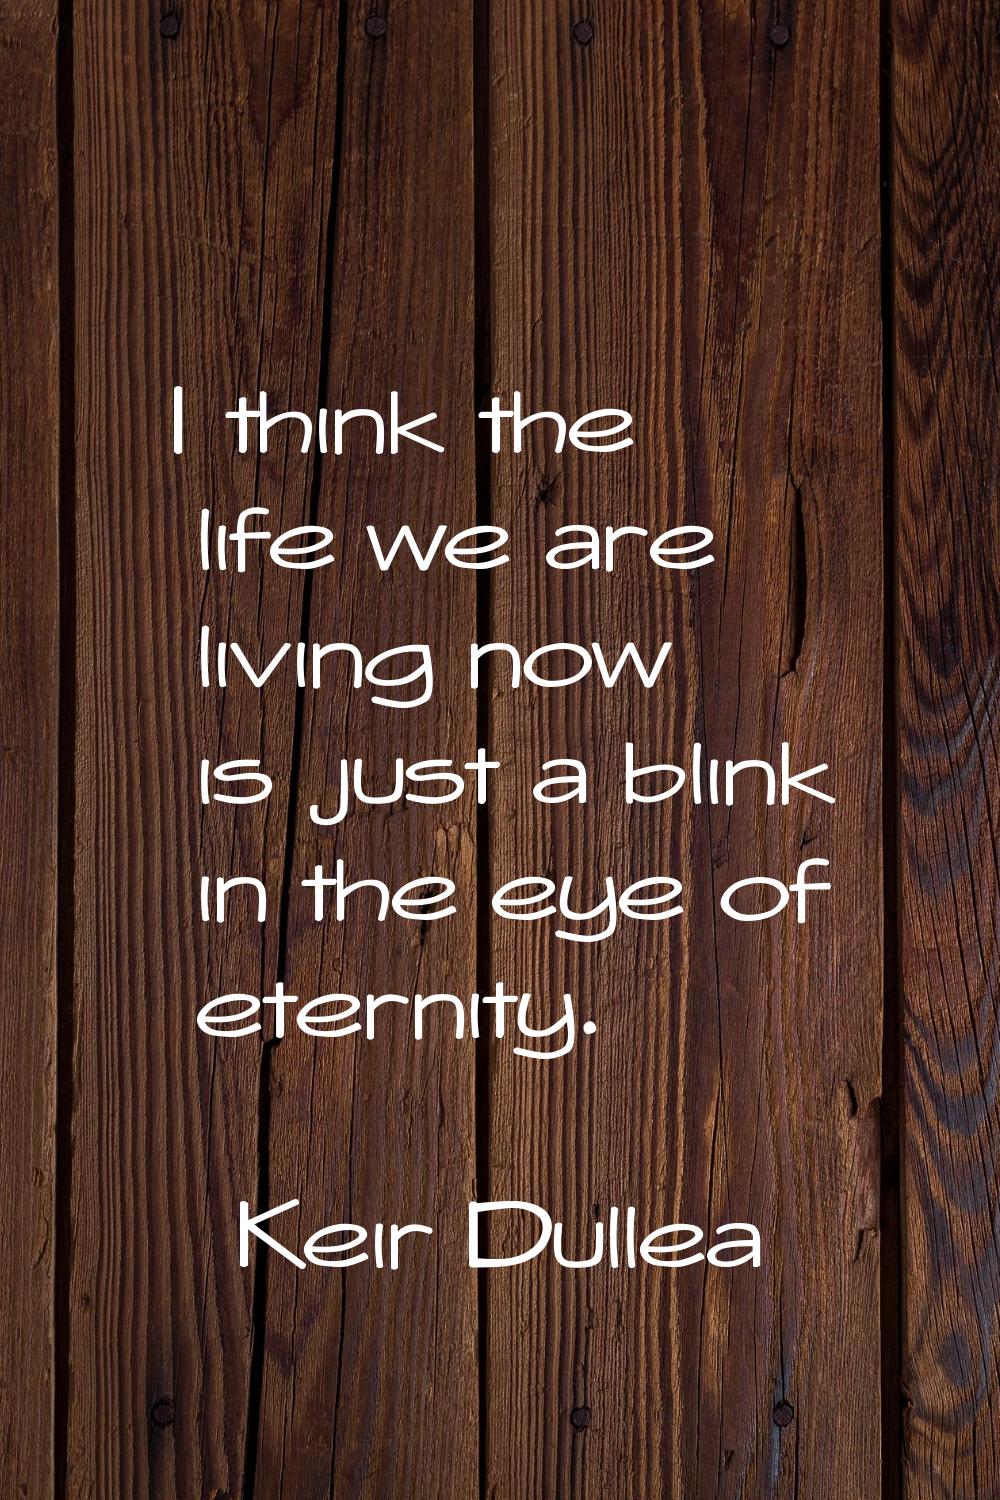 I think the life we are living now is just a blink in the eye of eternity.